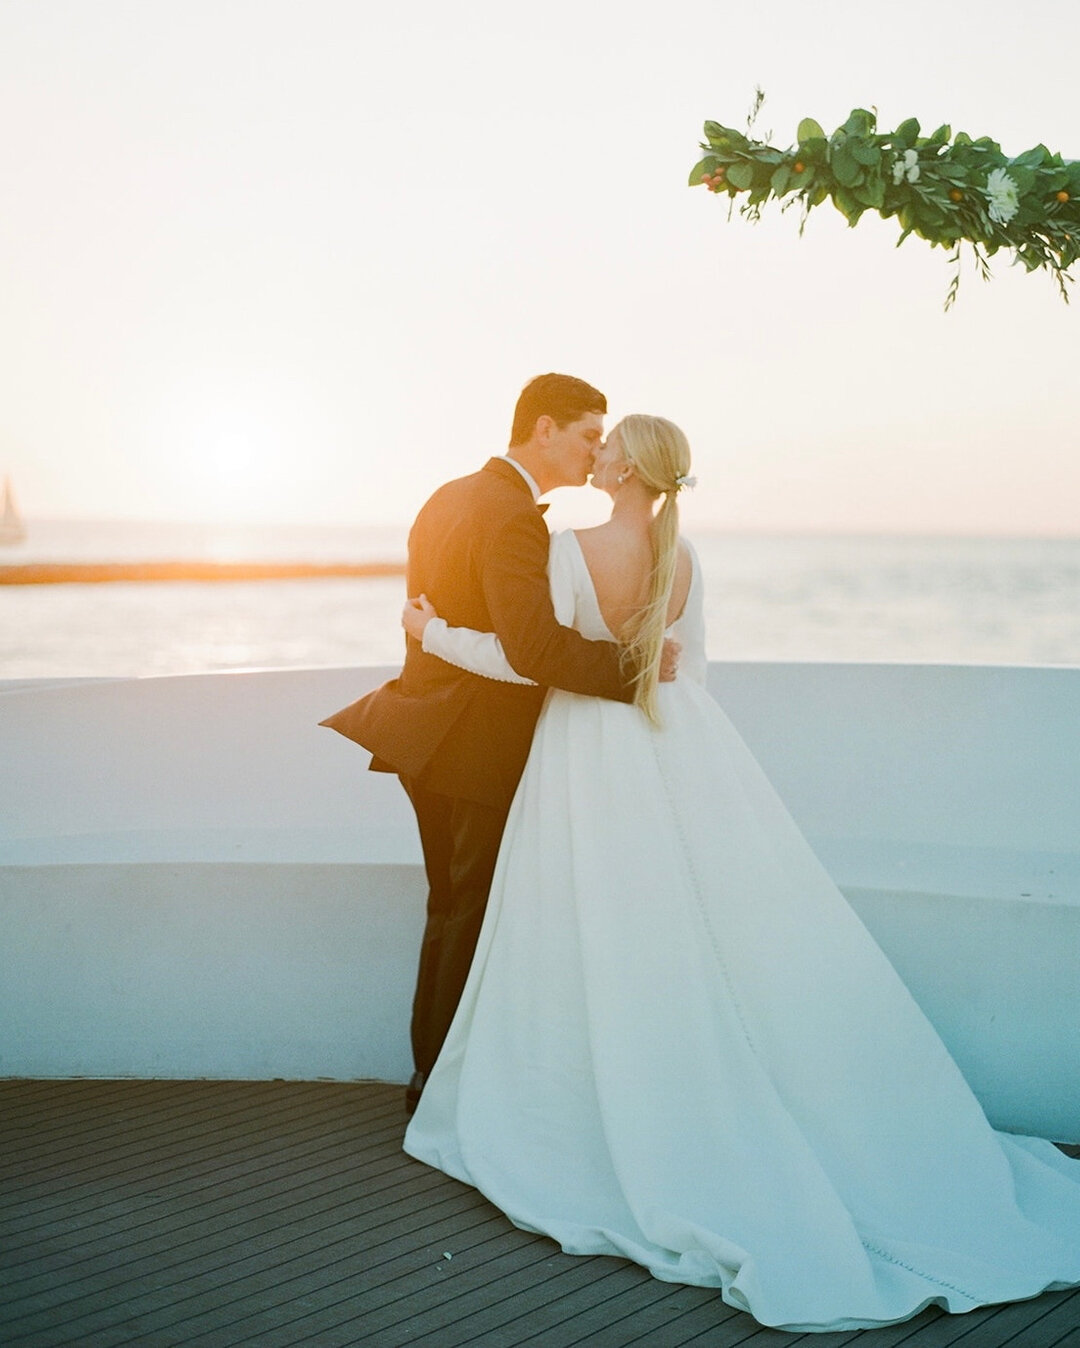 Taylor and Jake had the most breathtaking open seas sunset for their Yacht Starship wedding day. 🤍